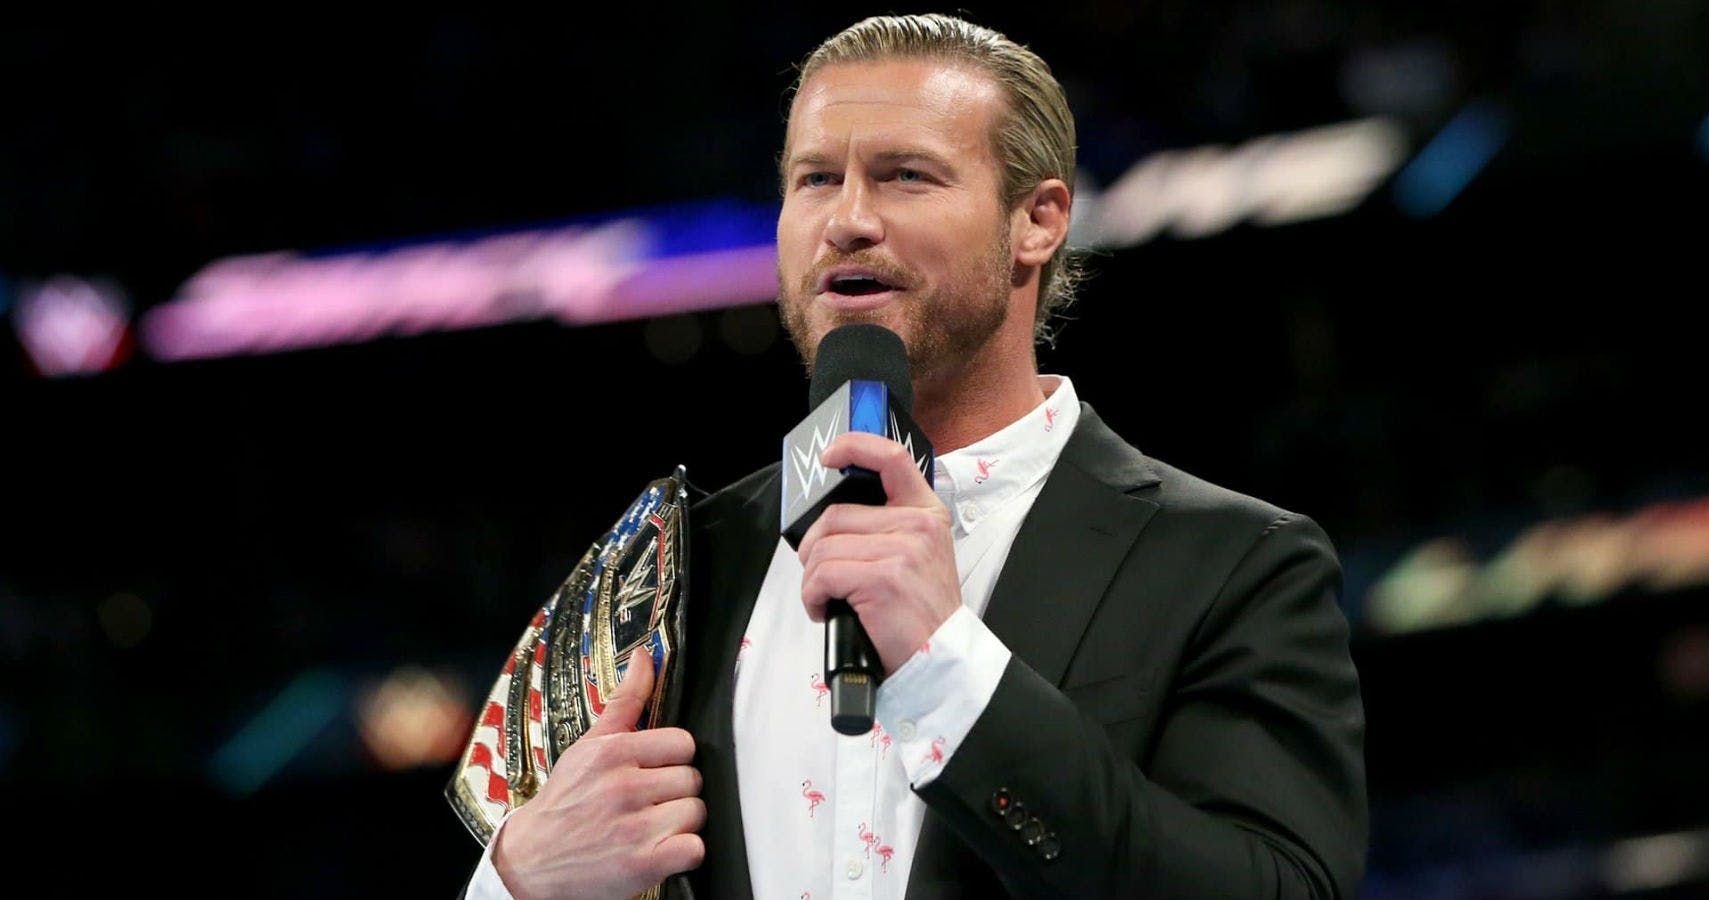 Dolph Ziggler has been released by WWE